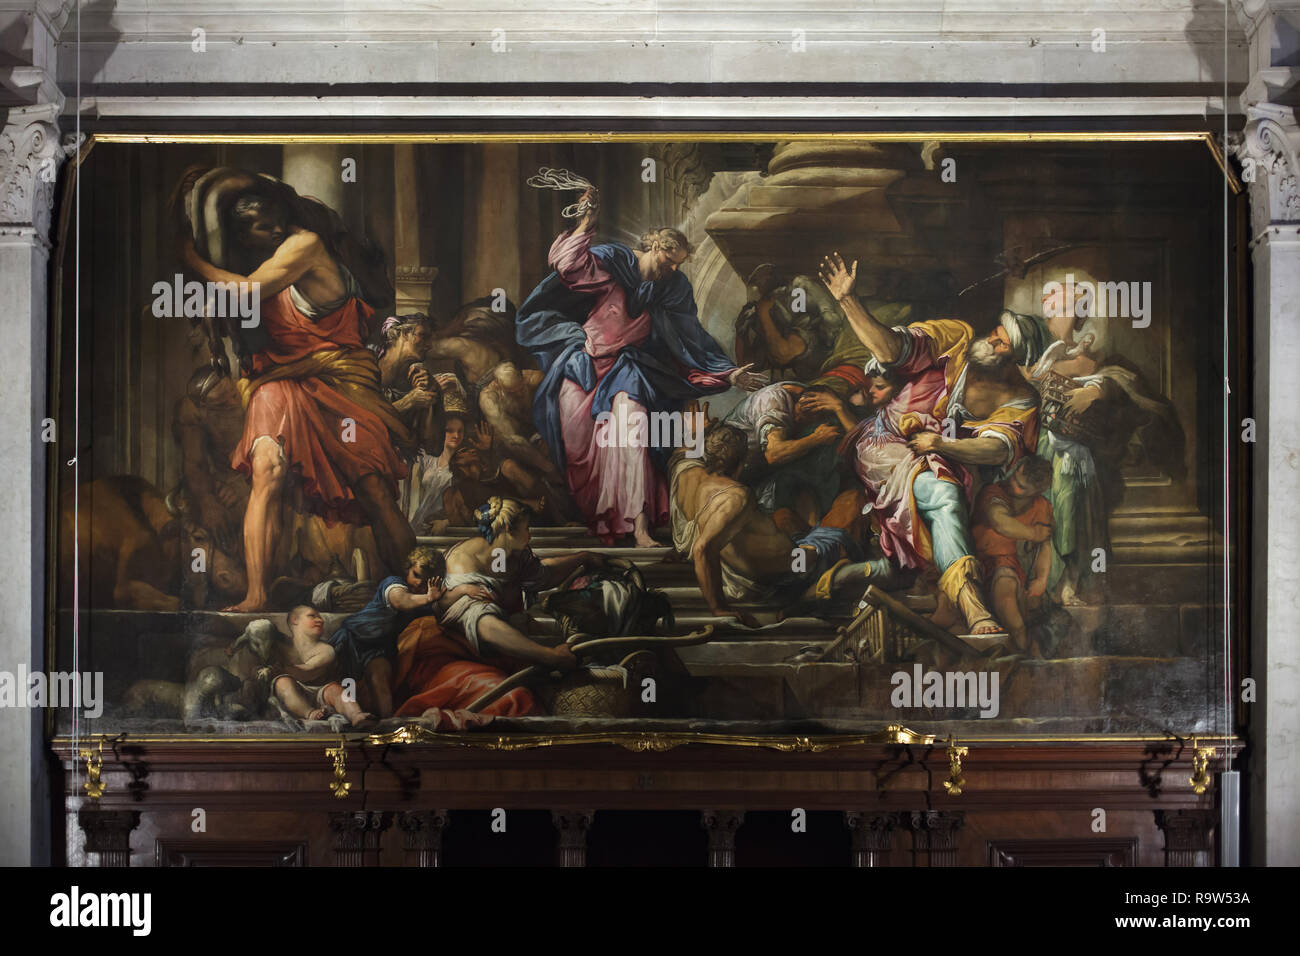 Painting 'Christ Expels the Merchants from the Temple' by Italian Baroque painter Giovanni Antonio Fumiani (1678) in the Church of Saint Roch (Chiesa di San Rocco) in Venice, Italy. Stock Photo